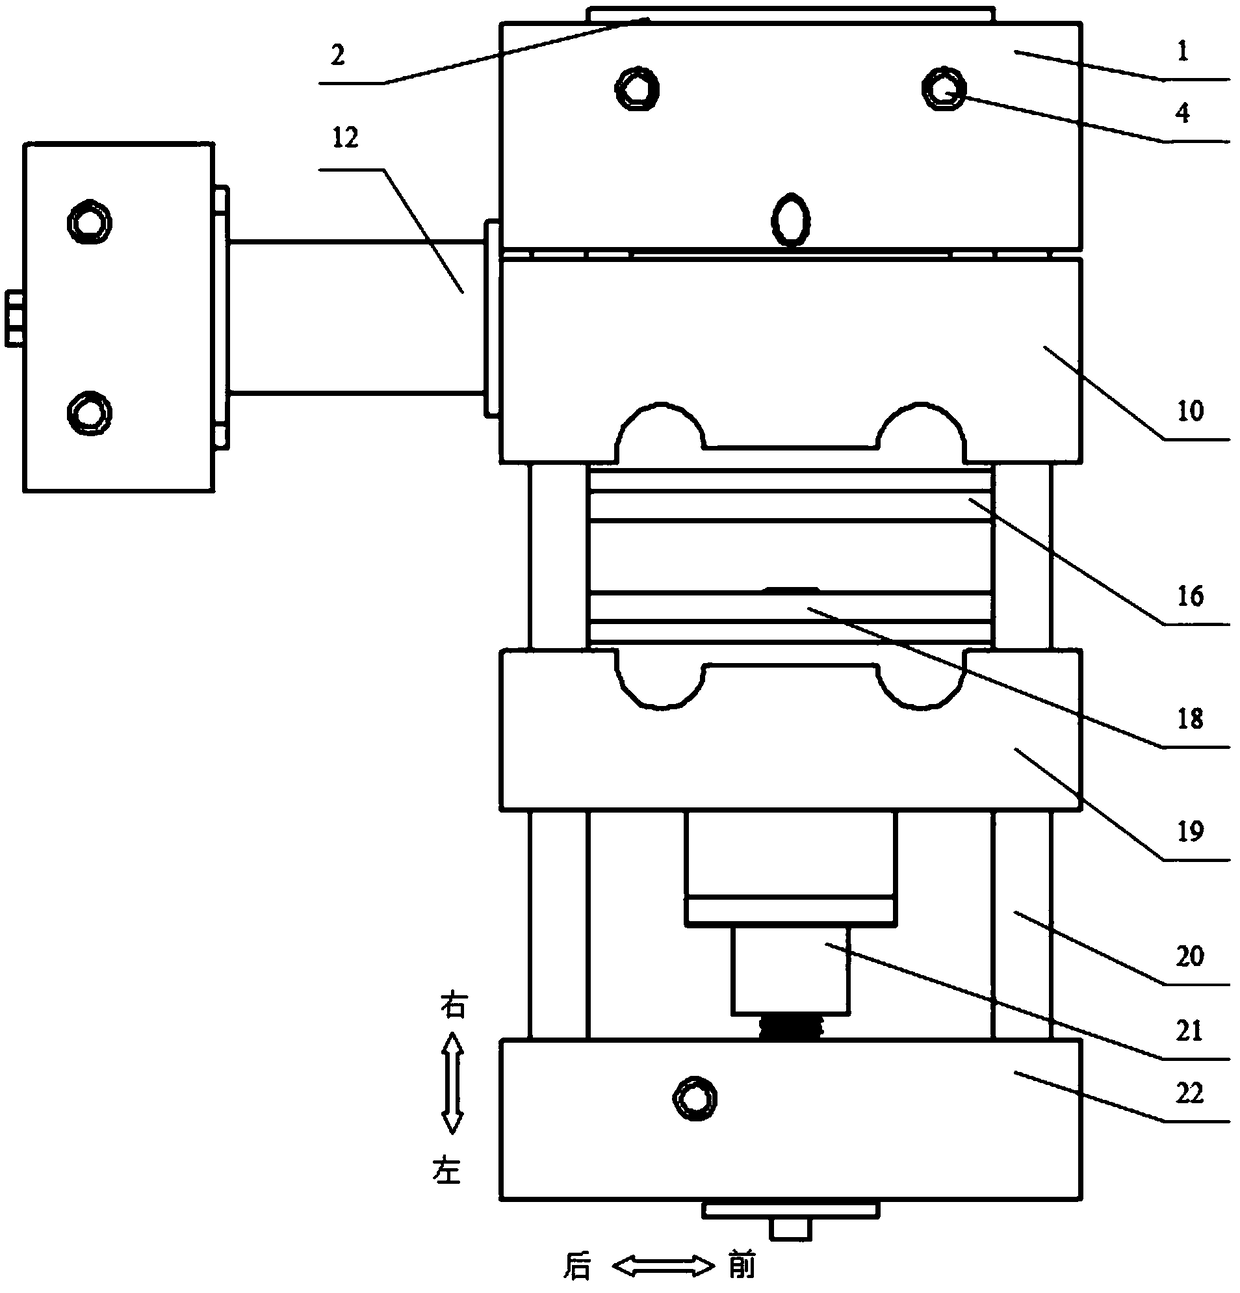 Micro injection molding machine with injection at right angles to the plasticizing axis